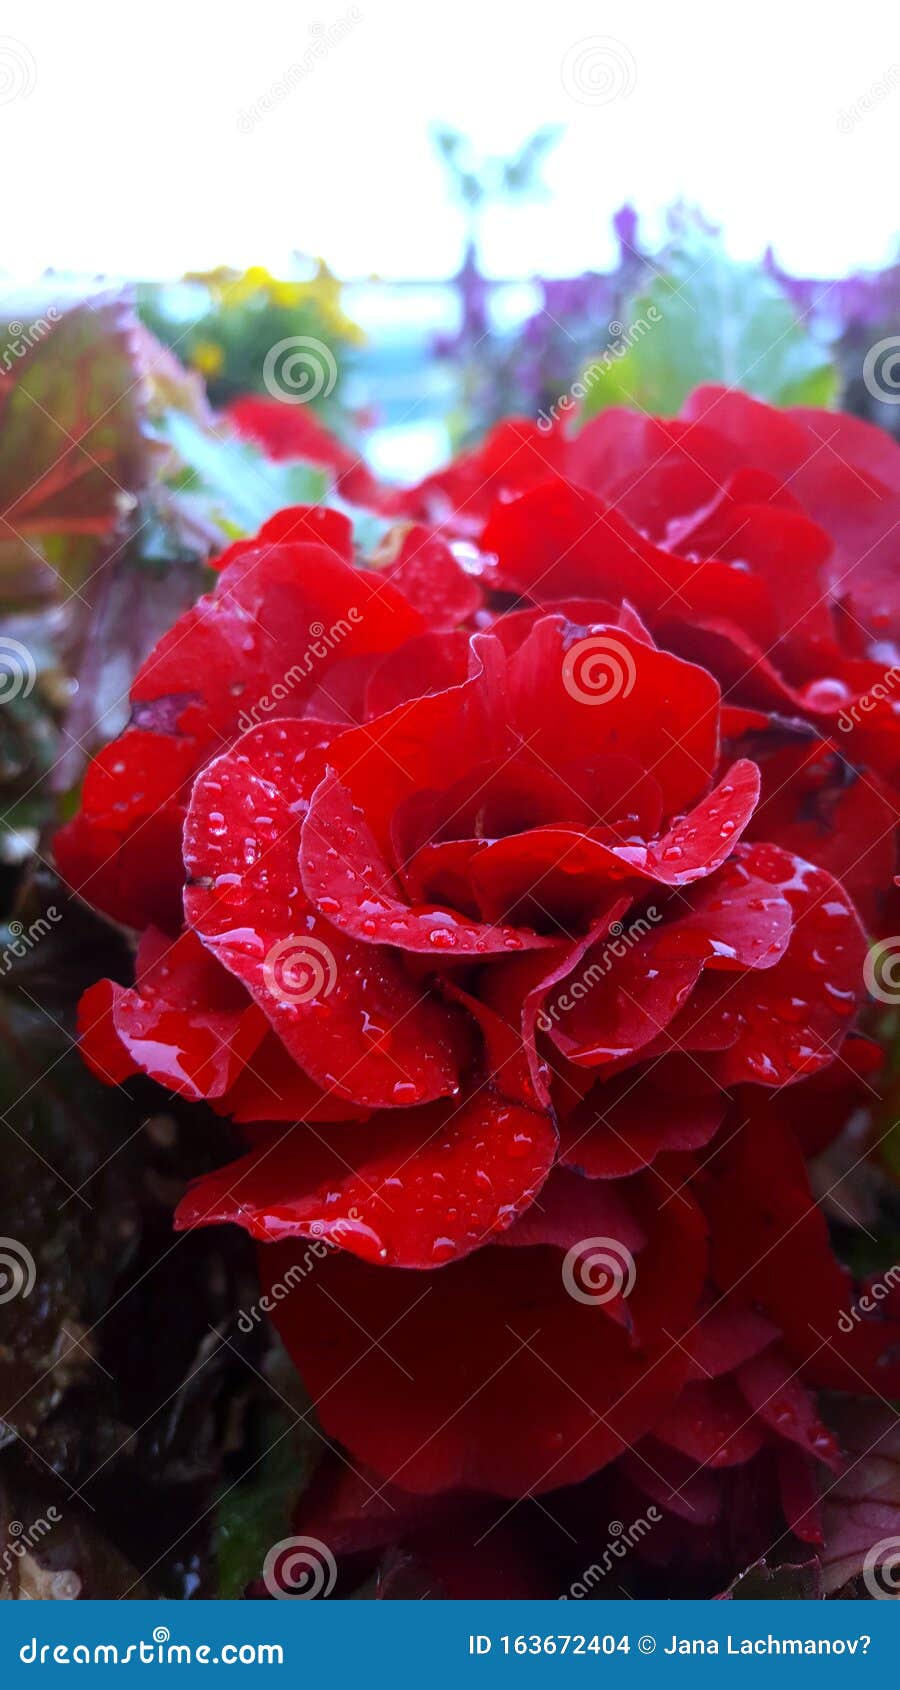 raindrops on a red rose.